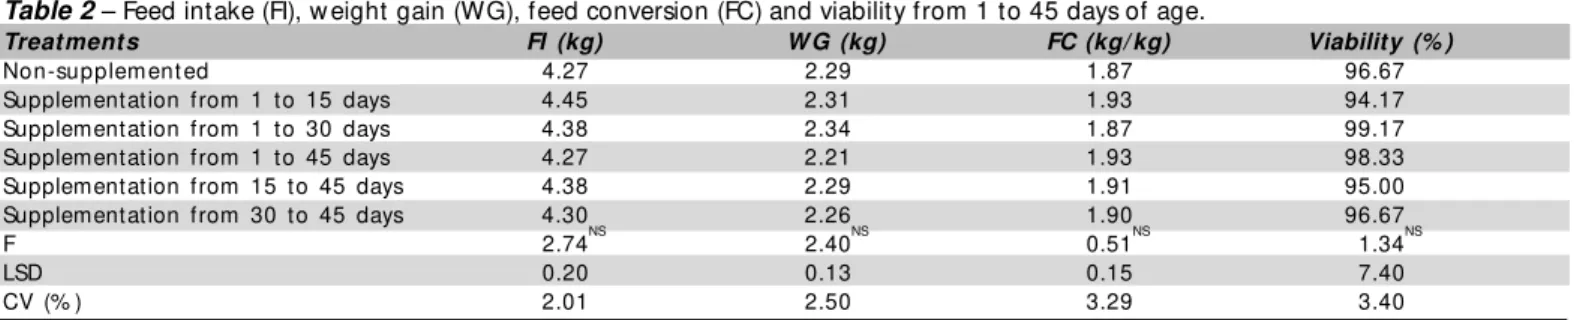 Table 2 – Feed intake (FI), w eight gain (WG), feed conversion (FC) and viability from 1 to 45 days of age.